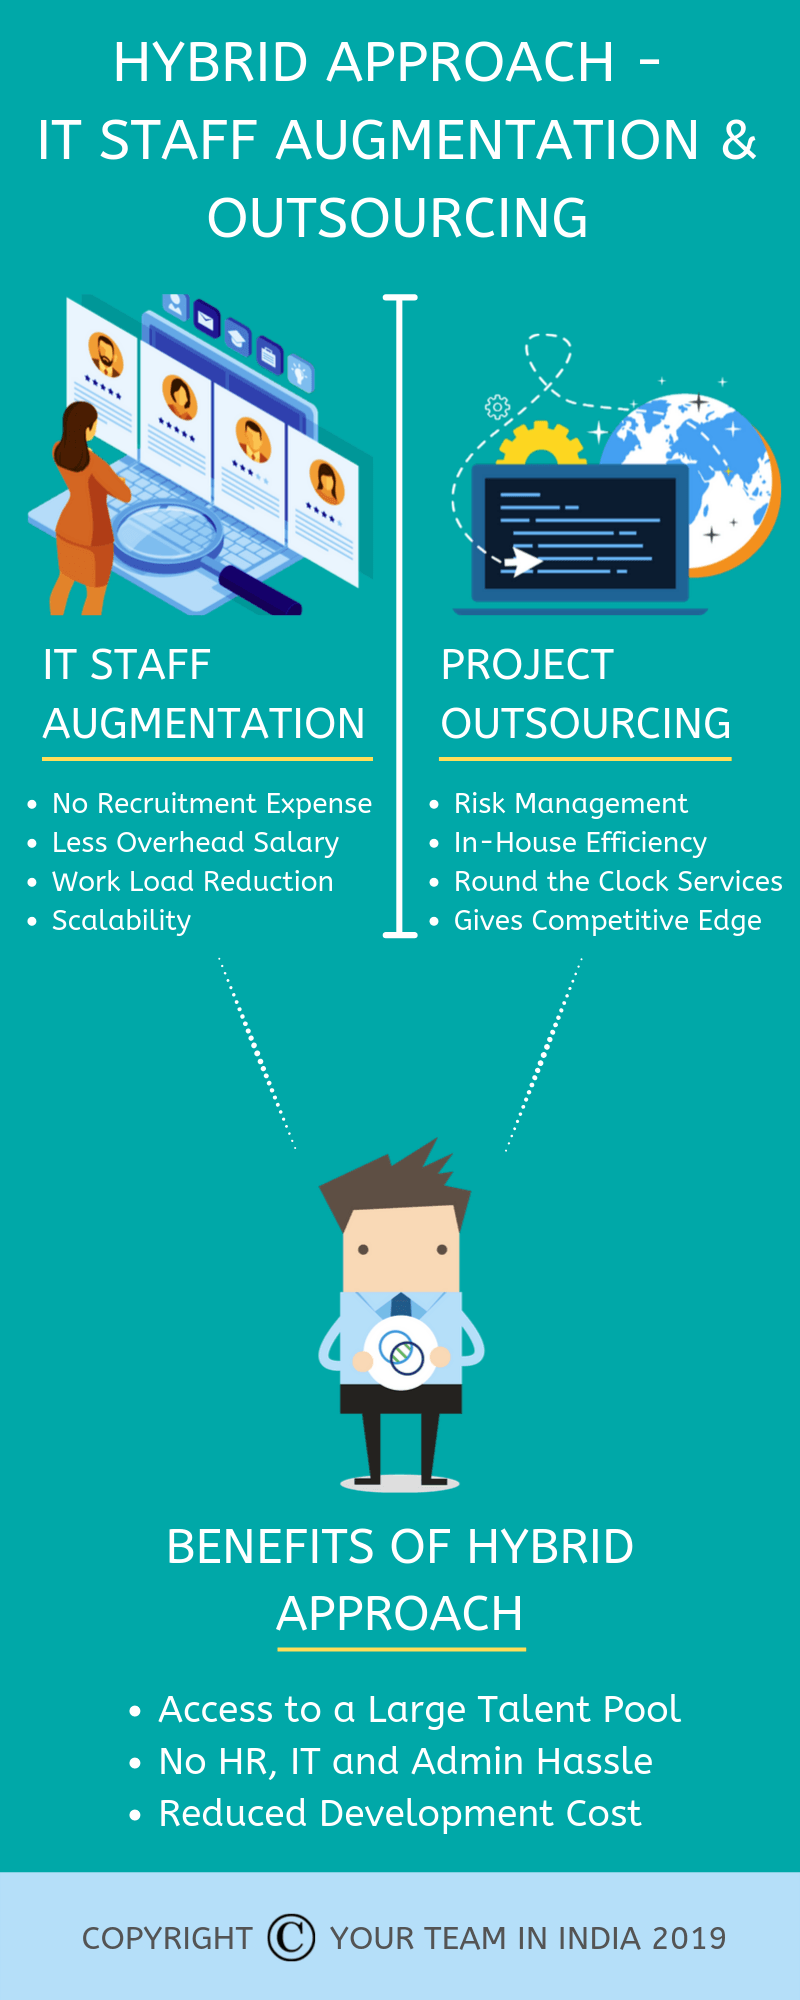 Hybrid Approach – IT Staff Augmentation & Outsourcing (Infographic)